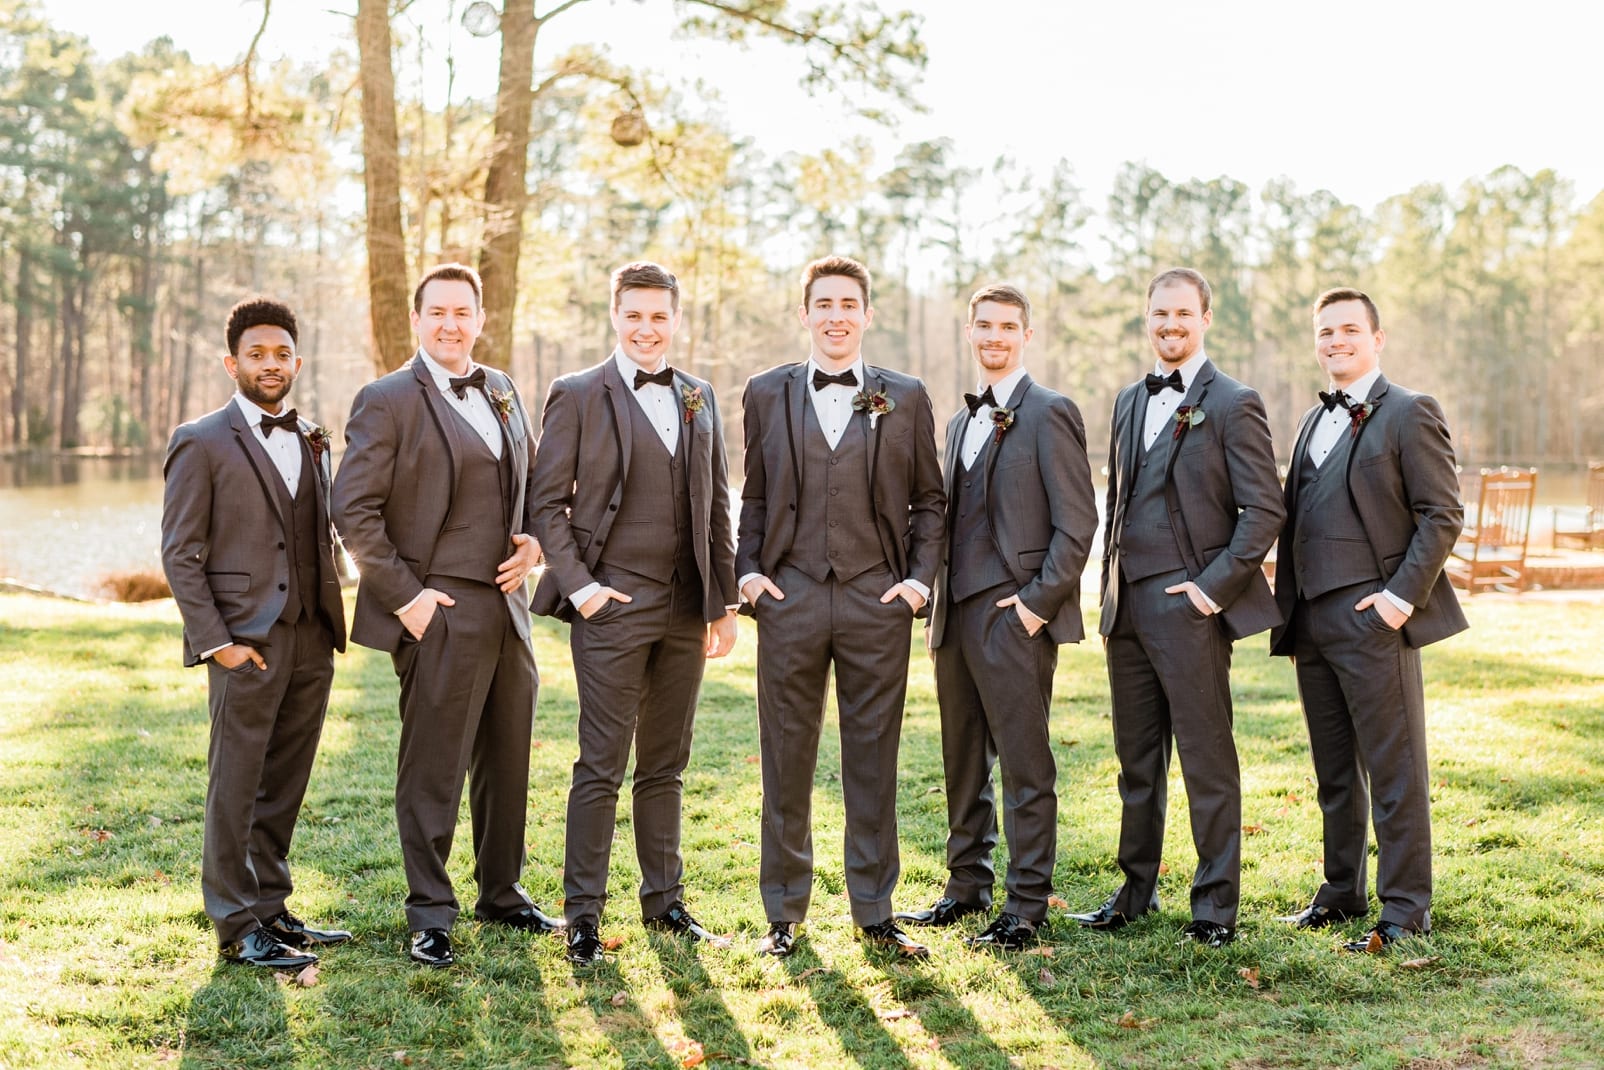 Angus Barn groomsmen wearing black tuxedos with their hands in their pockets photo